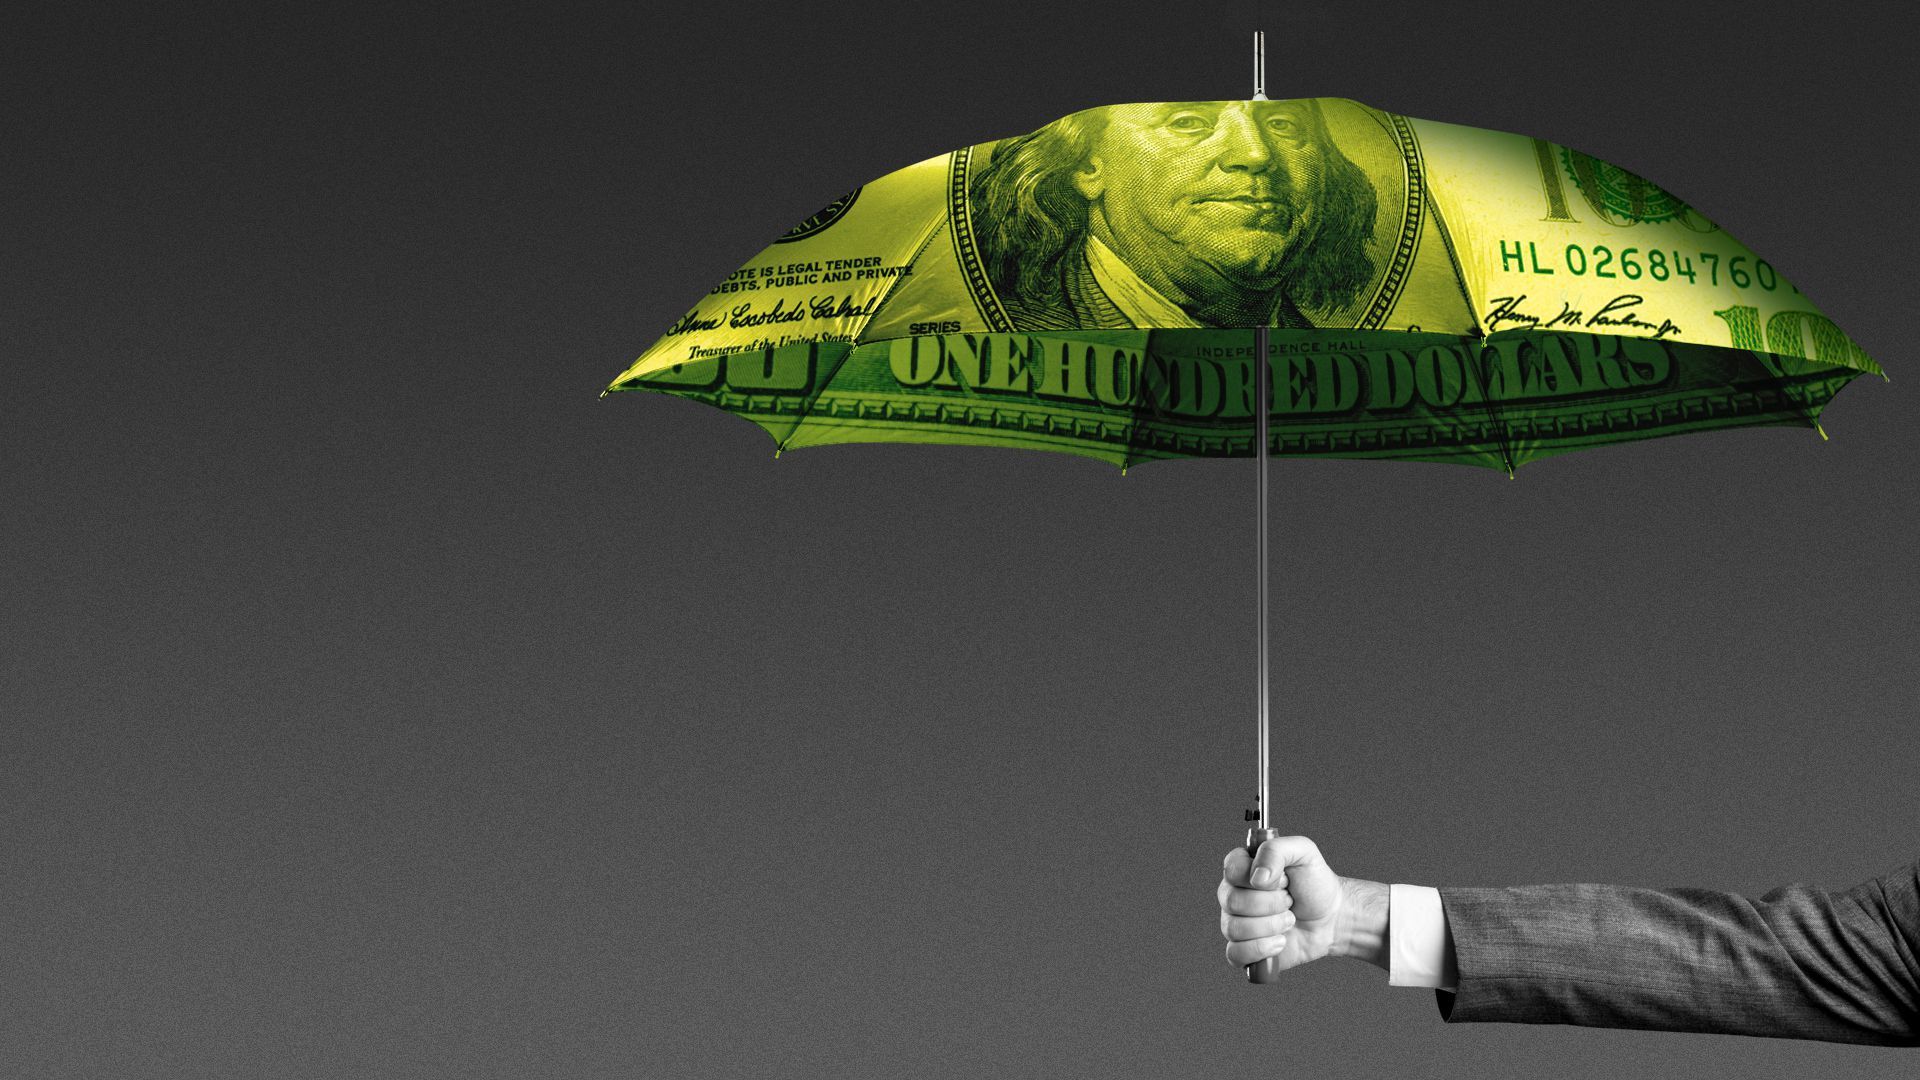 Illustration of a person in a suit holding an umbrella made of money